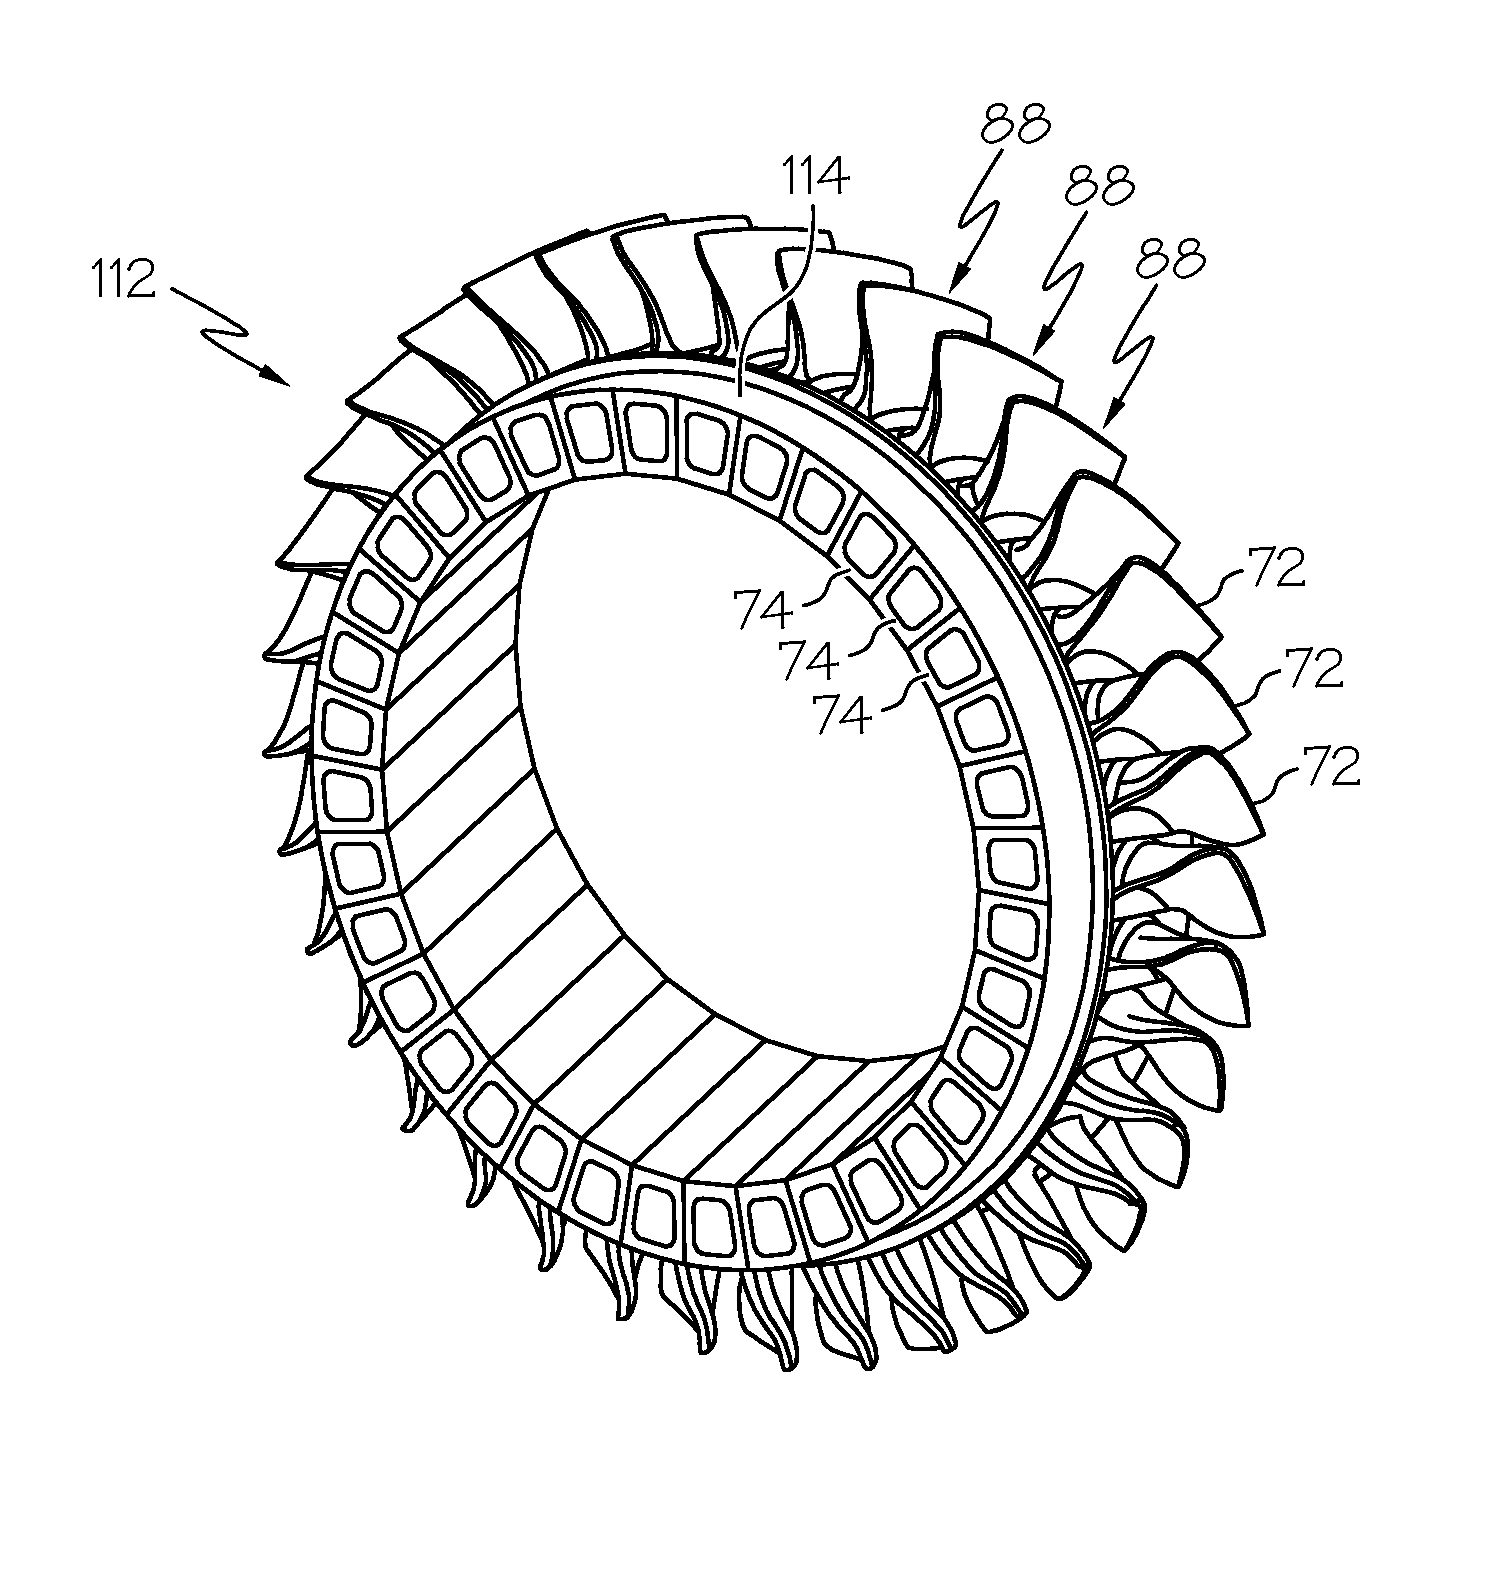 Methods and tooling assemblies for the manufacture of metallurgically-consolidated turbine engine components